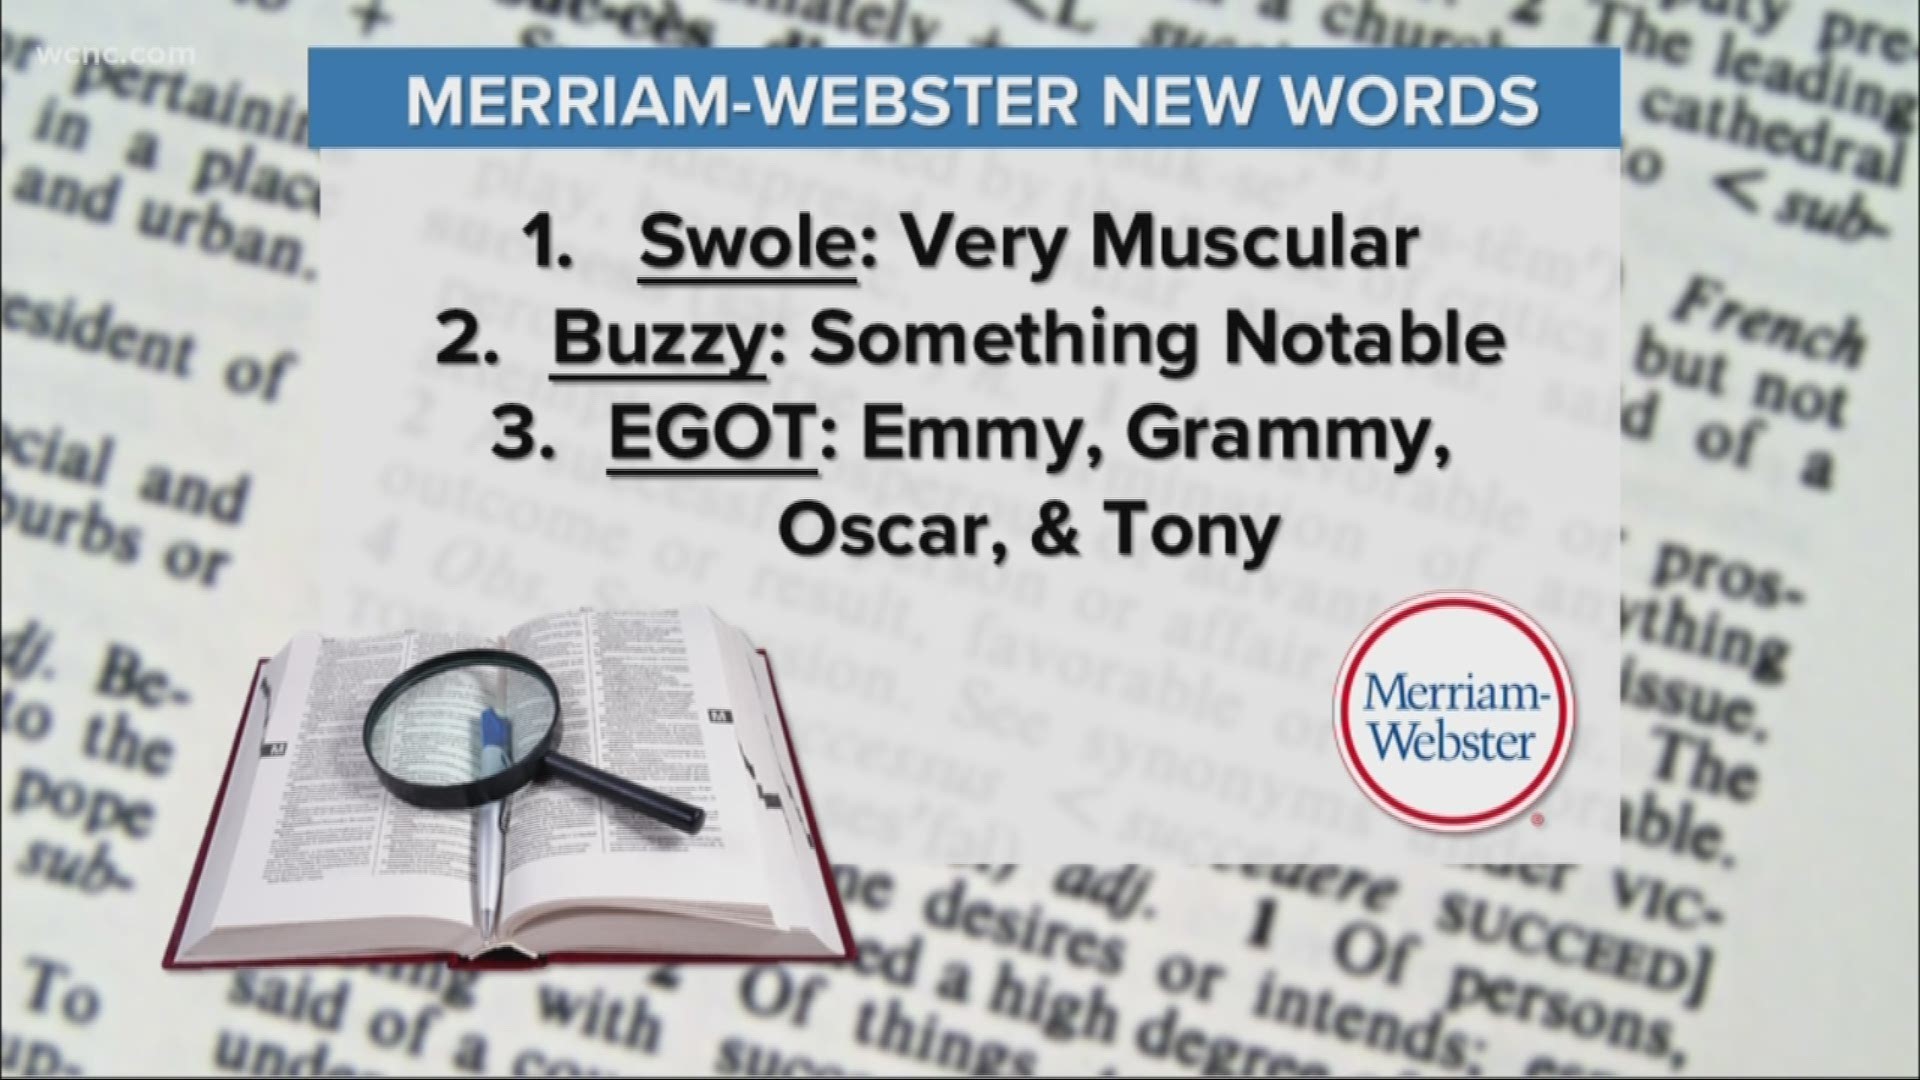 Merriam-Webster added 640 new words to the dictionary this year, including swole, buzzy and EGOT. There's even a very popular Eminem reference on the list.